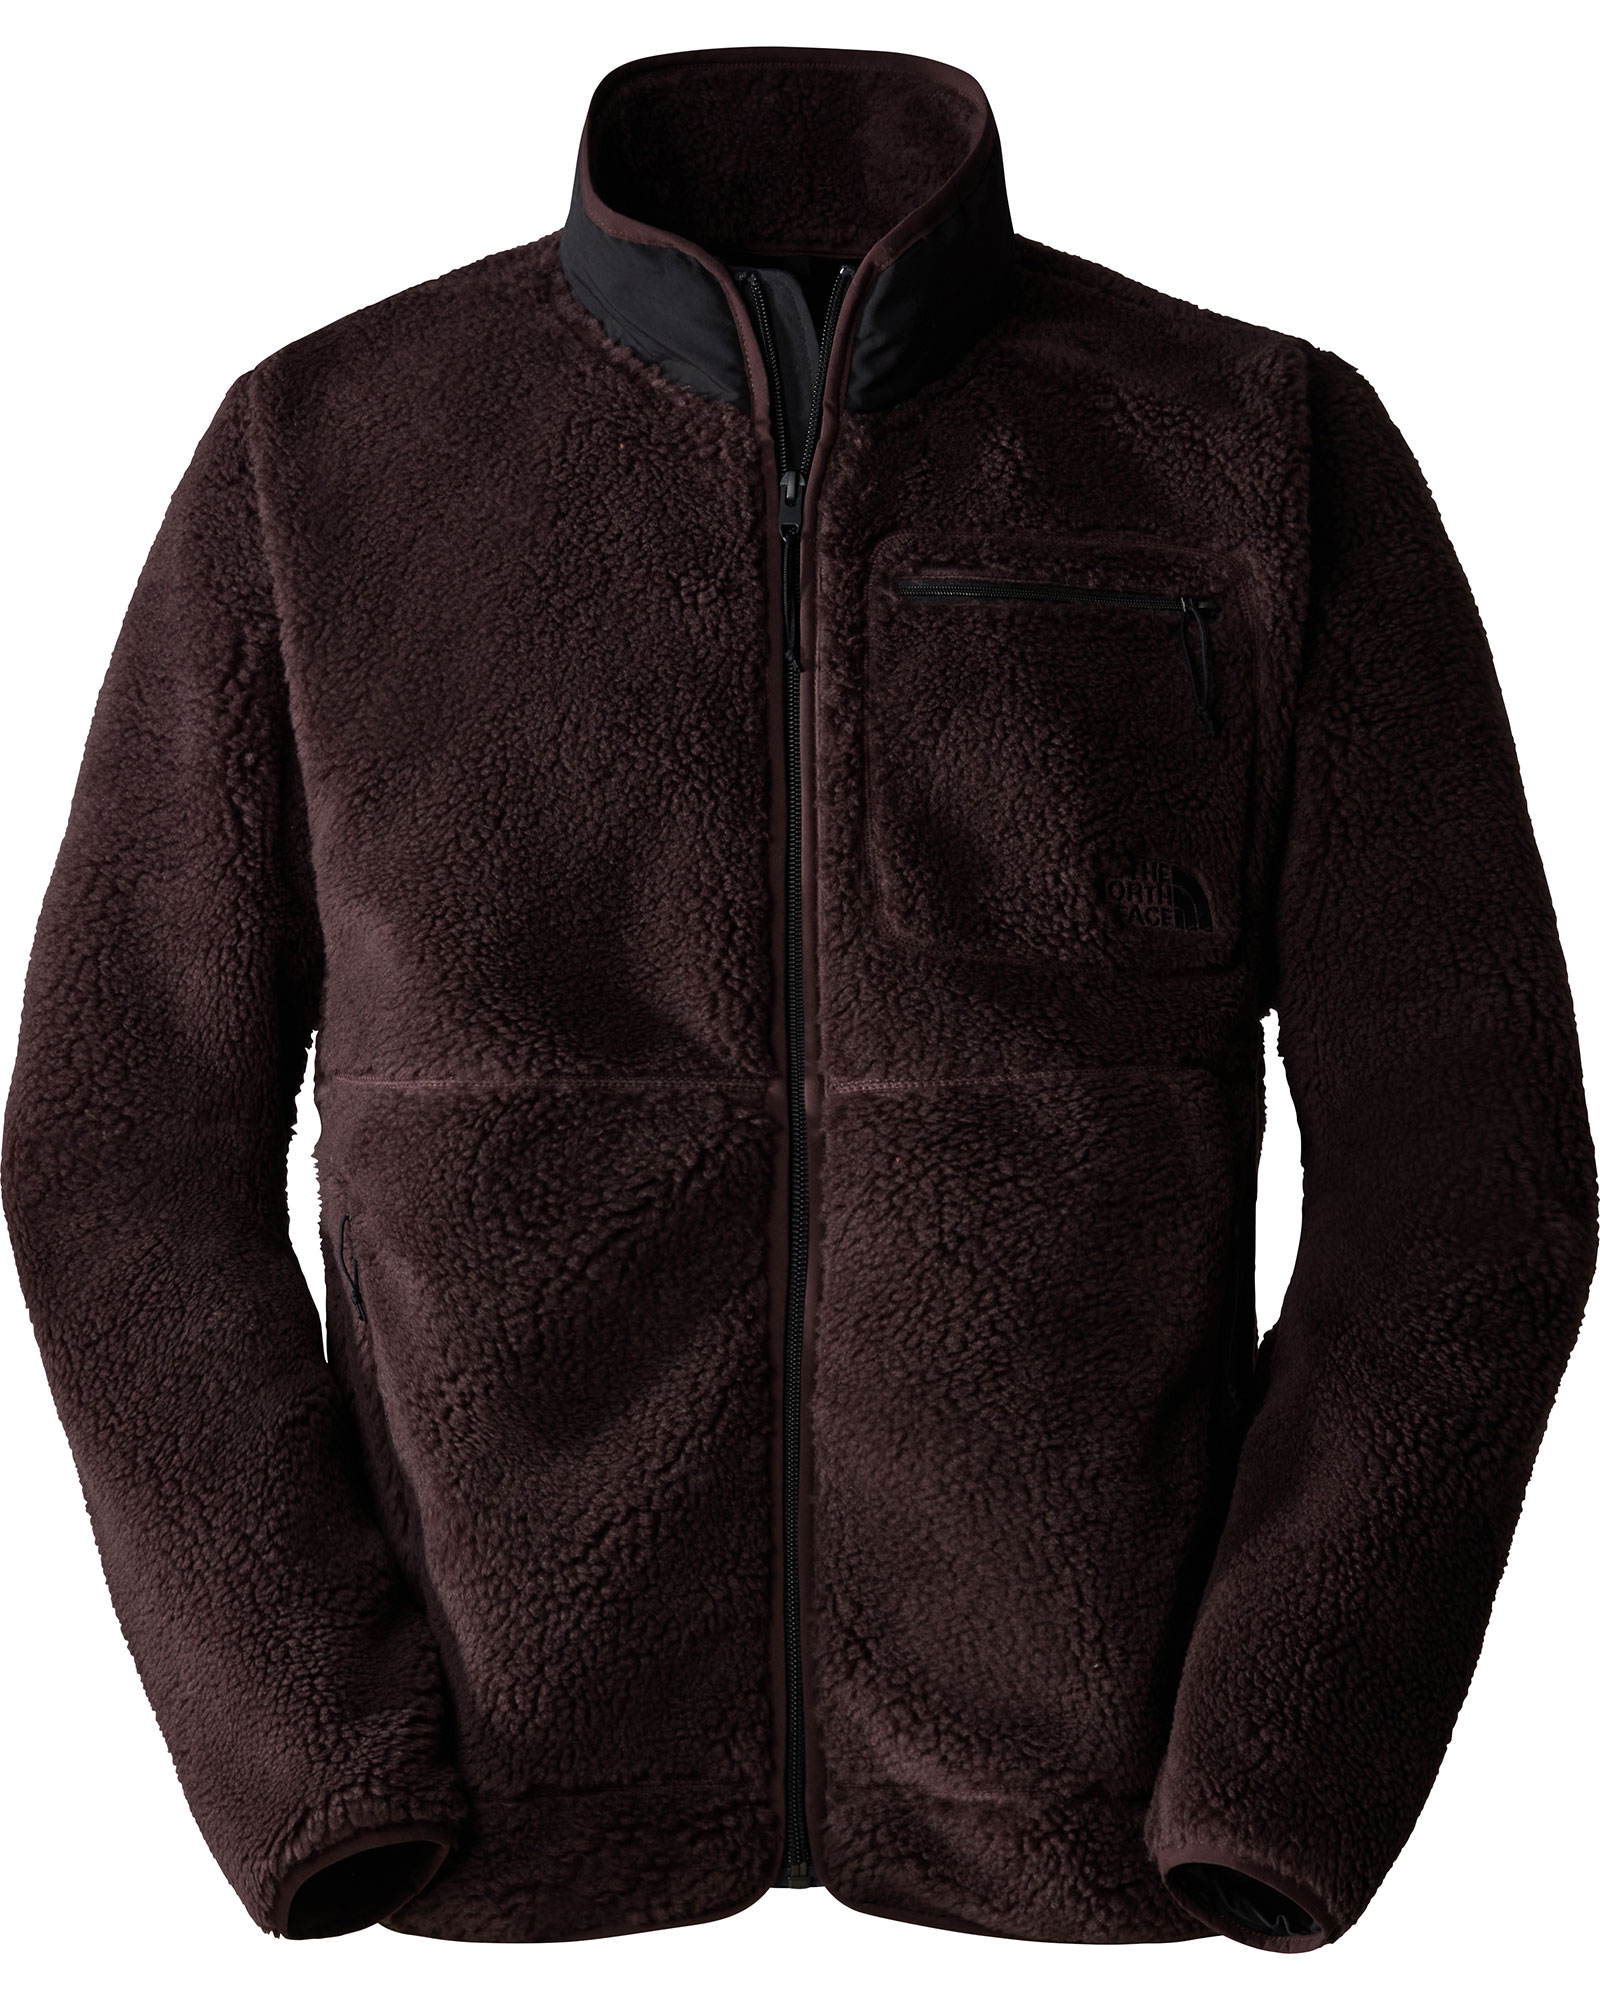 The North Face Men’s Extreme Pile Full Zip Jacket - Coal Brown XL